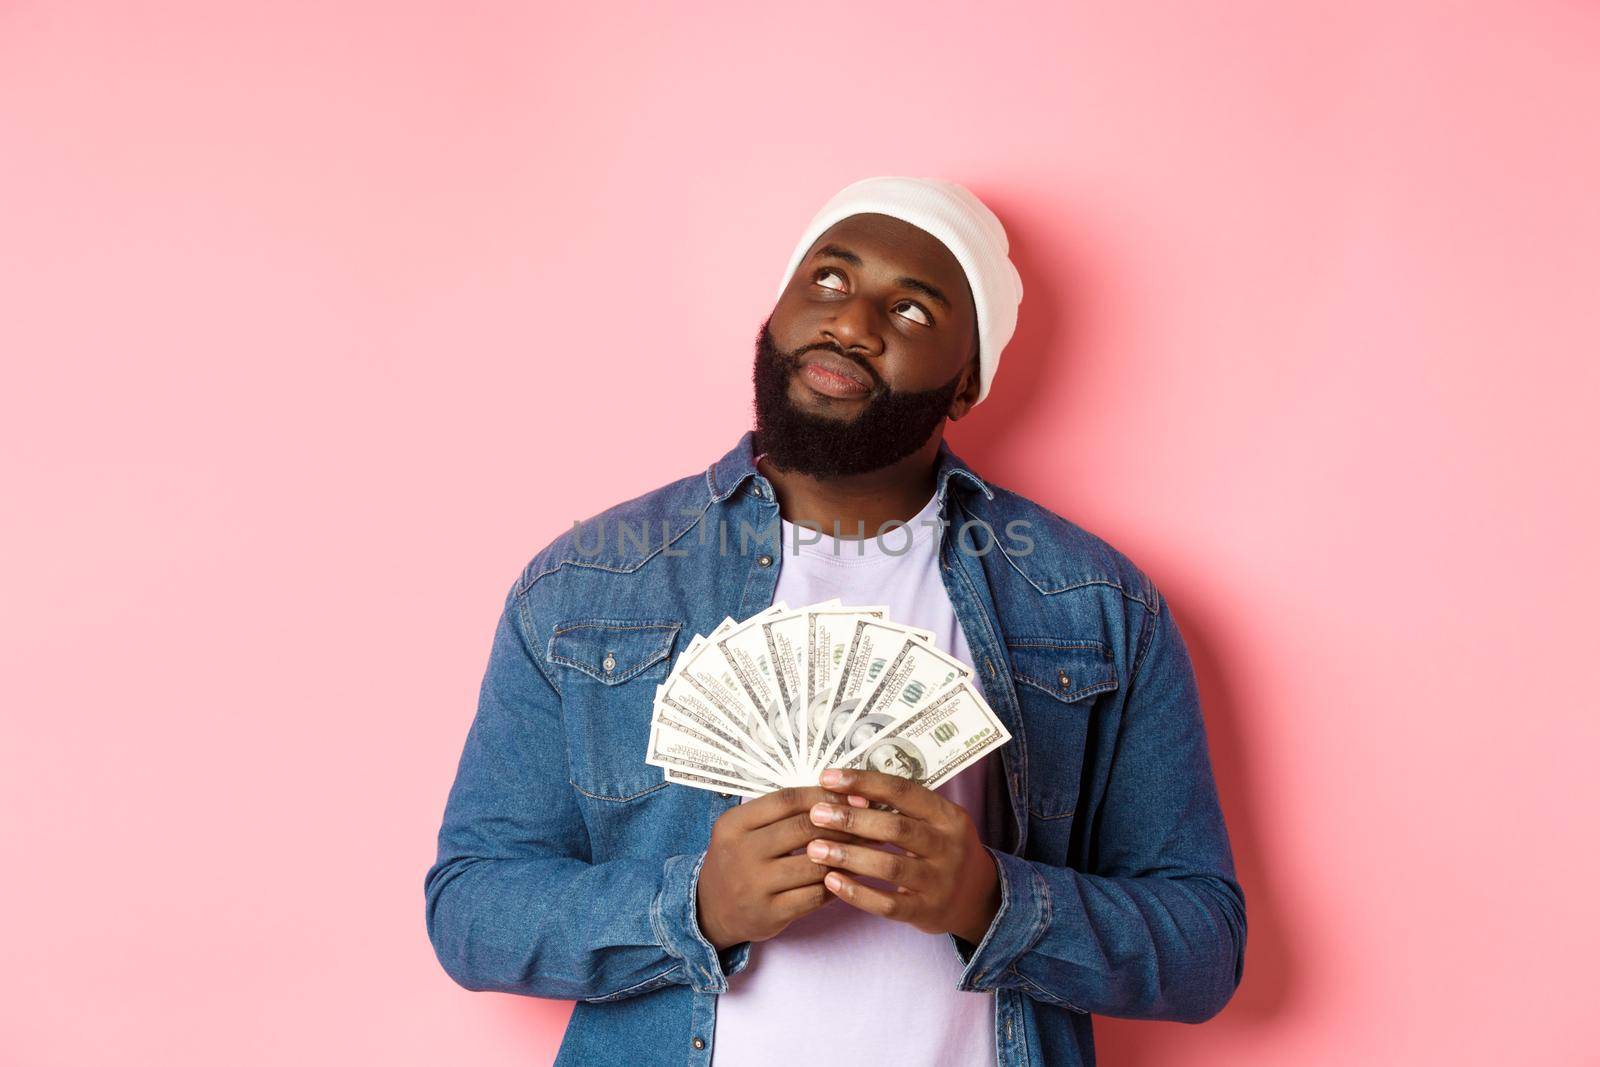 Dreamy african-american man thinking about shopping, holding money dollars and looking upper left corner, standing over pink background.